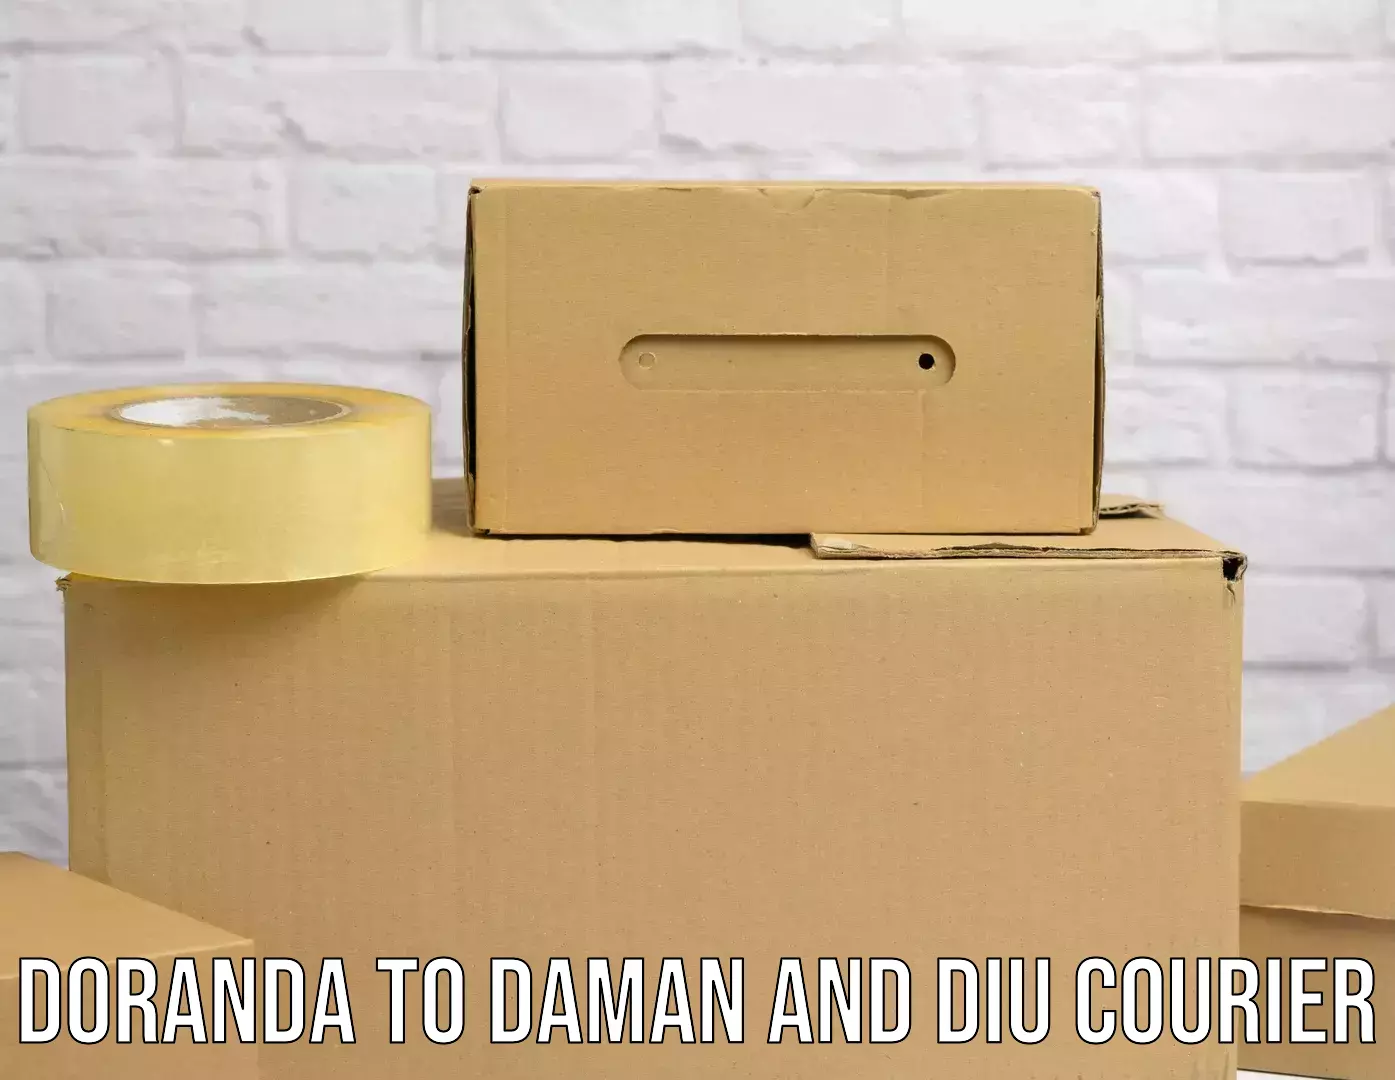 Local courier options in Doranda to Daman and Diu